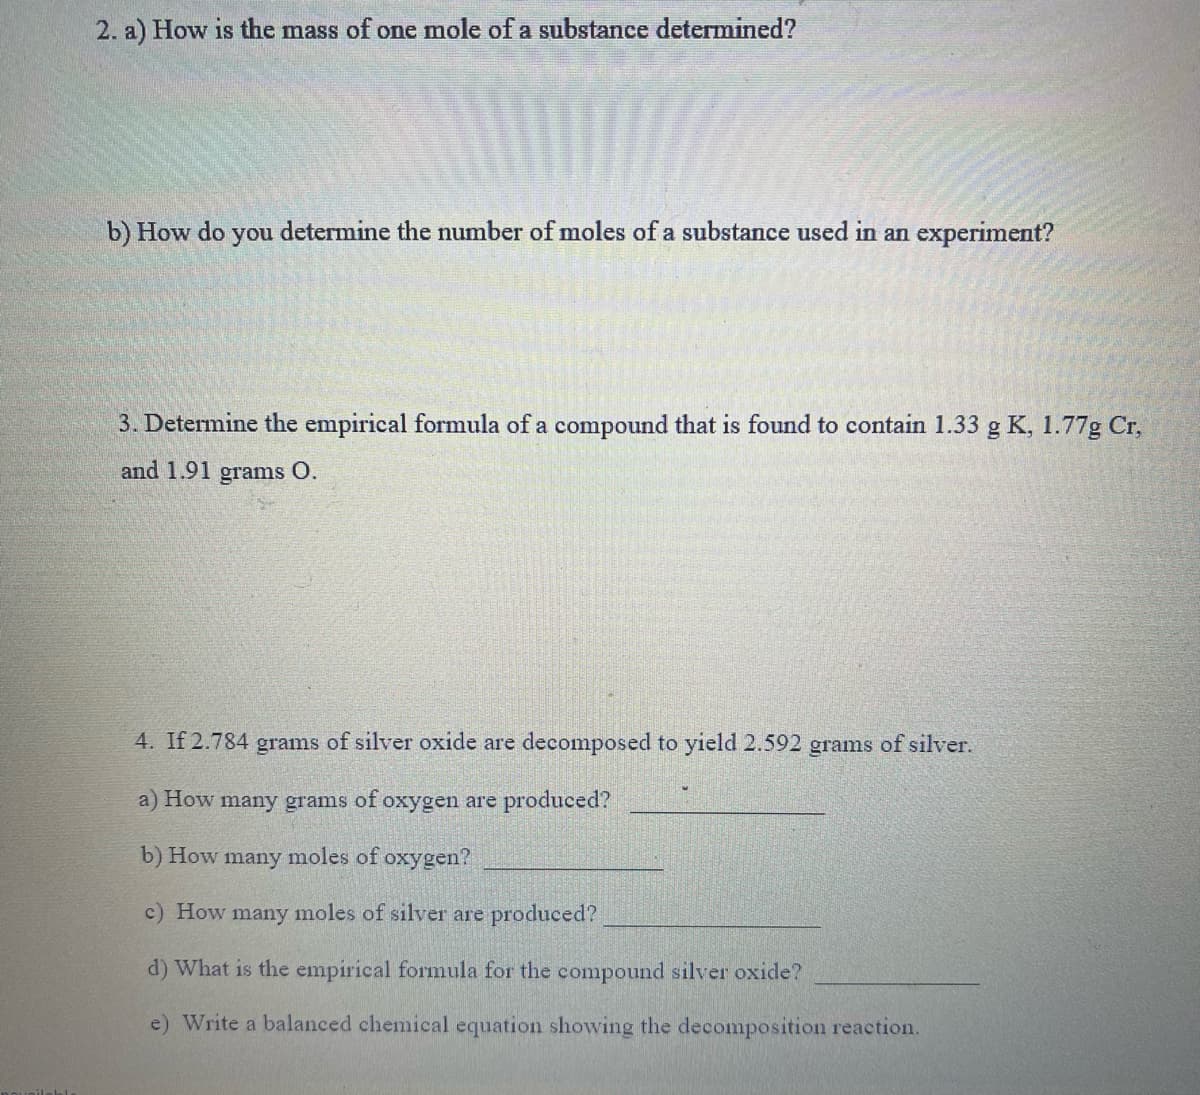 2. a) How is the mass of one mole of a substance determined?
b) How do
you
determine the number of moles of a substance used in an experiment?
3. Determine the empirical formula of a compound that is found to contain 1.33 g K, 1.77g Cr,
and 1.91 grams O.
4. If 2.784 grams of silver oxide are decomposed to yield 2.592 grams of silver.
a) How many grams of oxygen are produced?
b) How many moles of oxygen?
c) How many moles of silver are produced?
d) What is the empirical formula for the compound silver oxide?
e) Write a balanced chemical equation showing the decomposition reaction.
